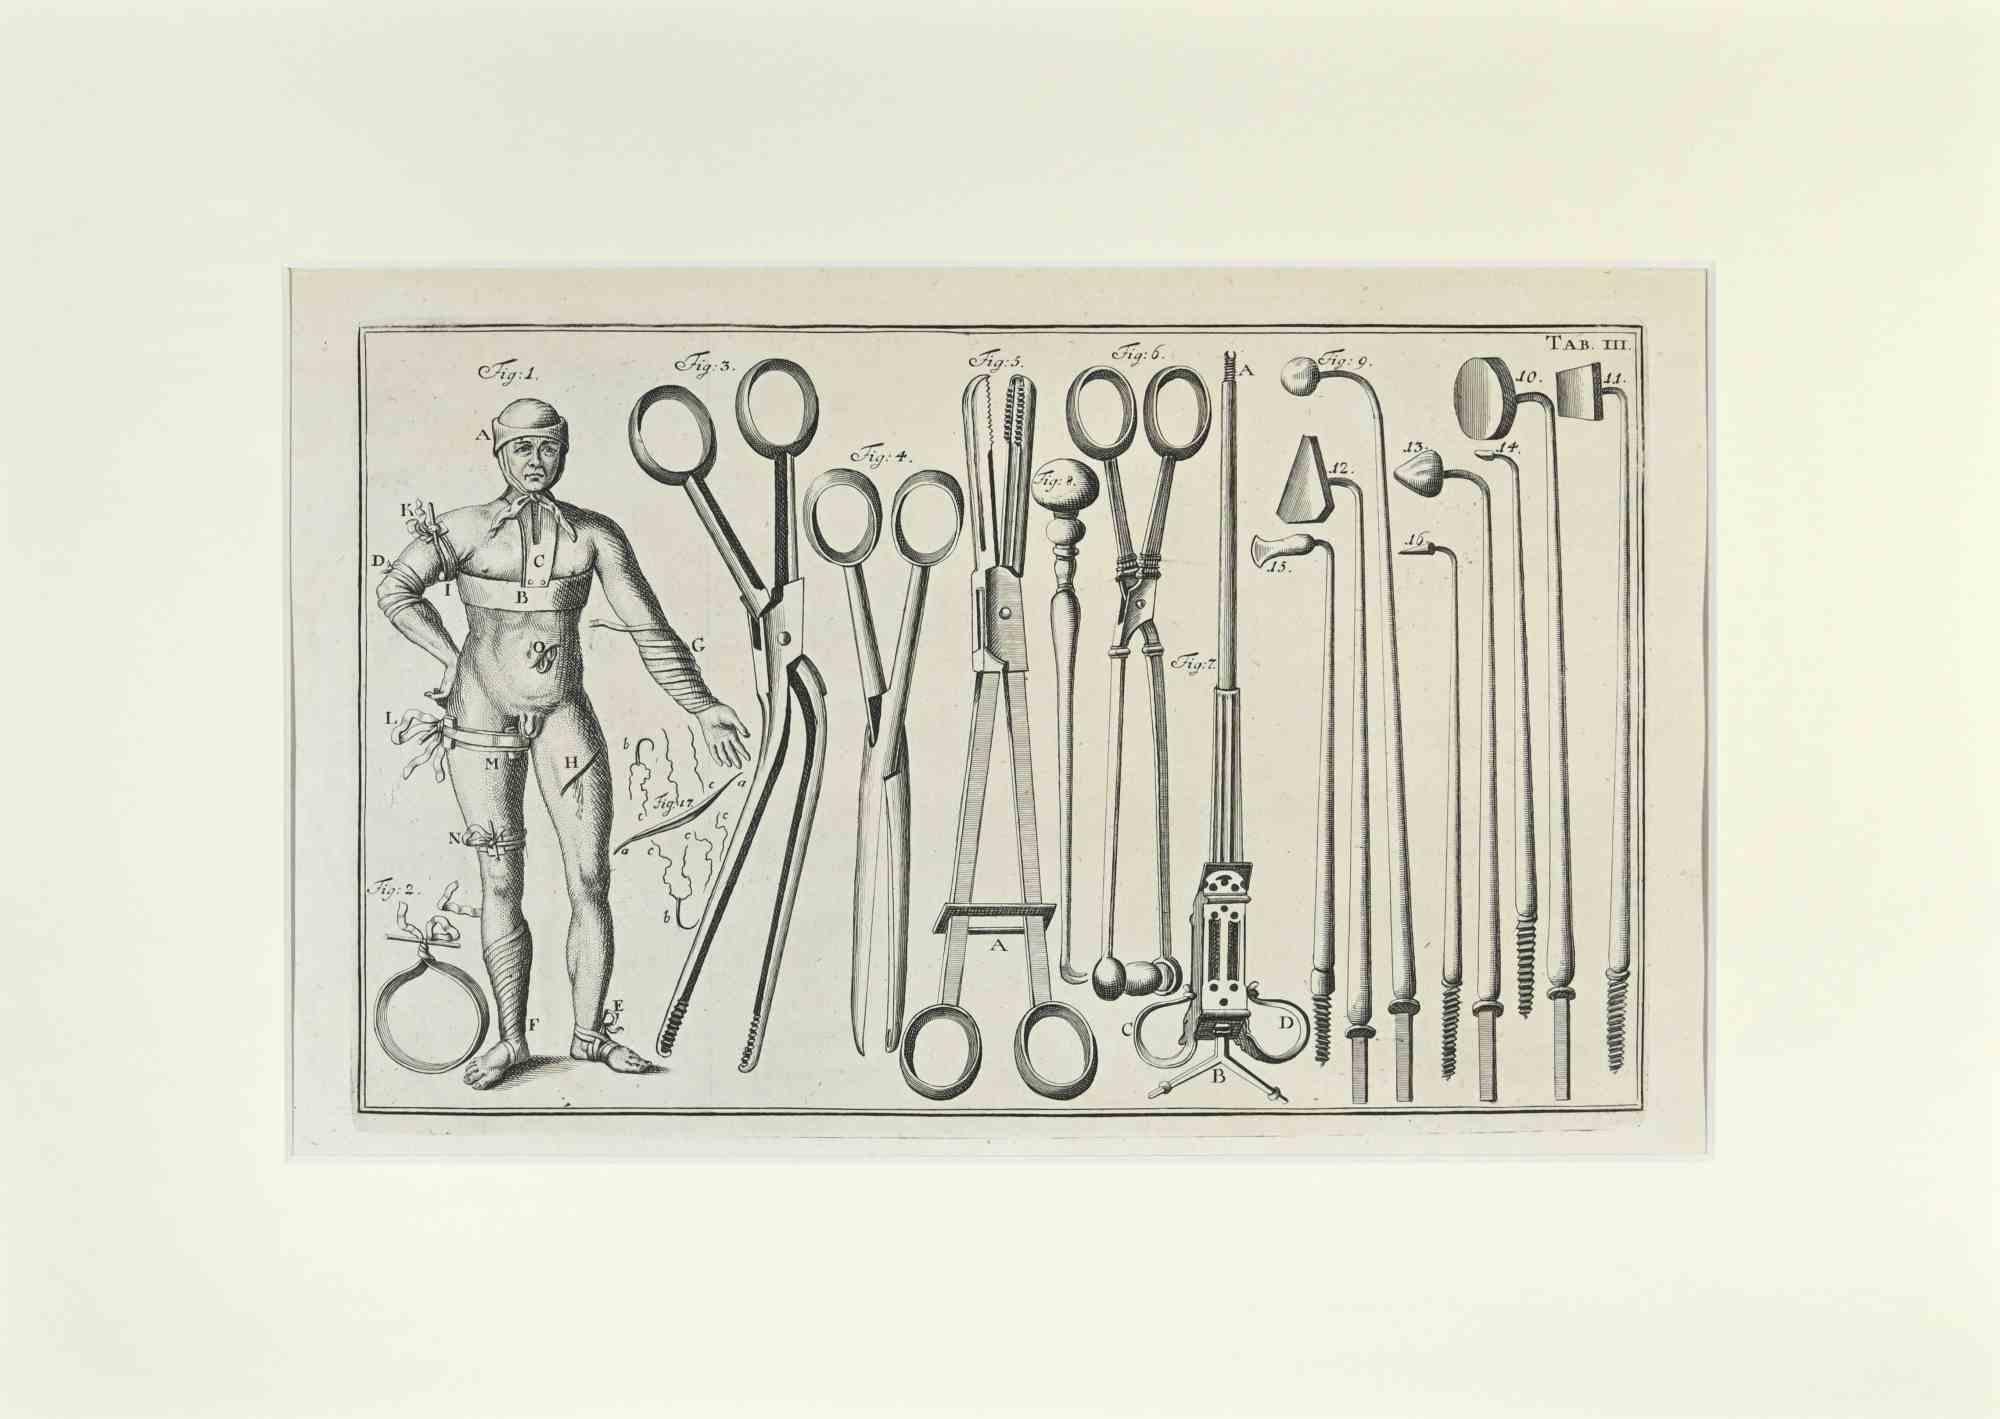 Surgical Instruments is part of the suite realized by Lorenz Heister in the series of Institutiones Chirurgicae, Amsterdam, Janssonius-Waesberg, 1750.

Etching on paper.

The work belongs to the Latin edition of the famous work by the founder of